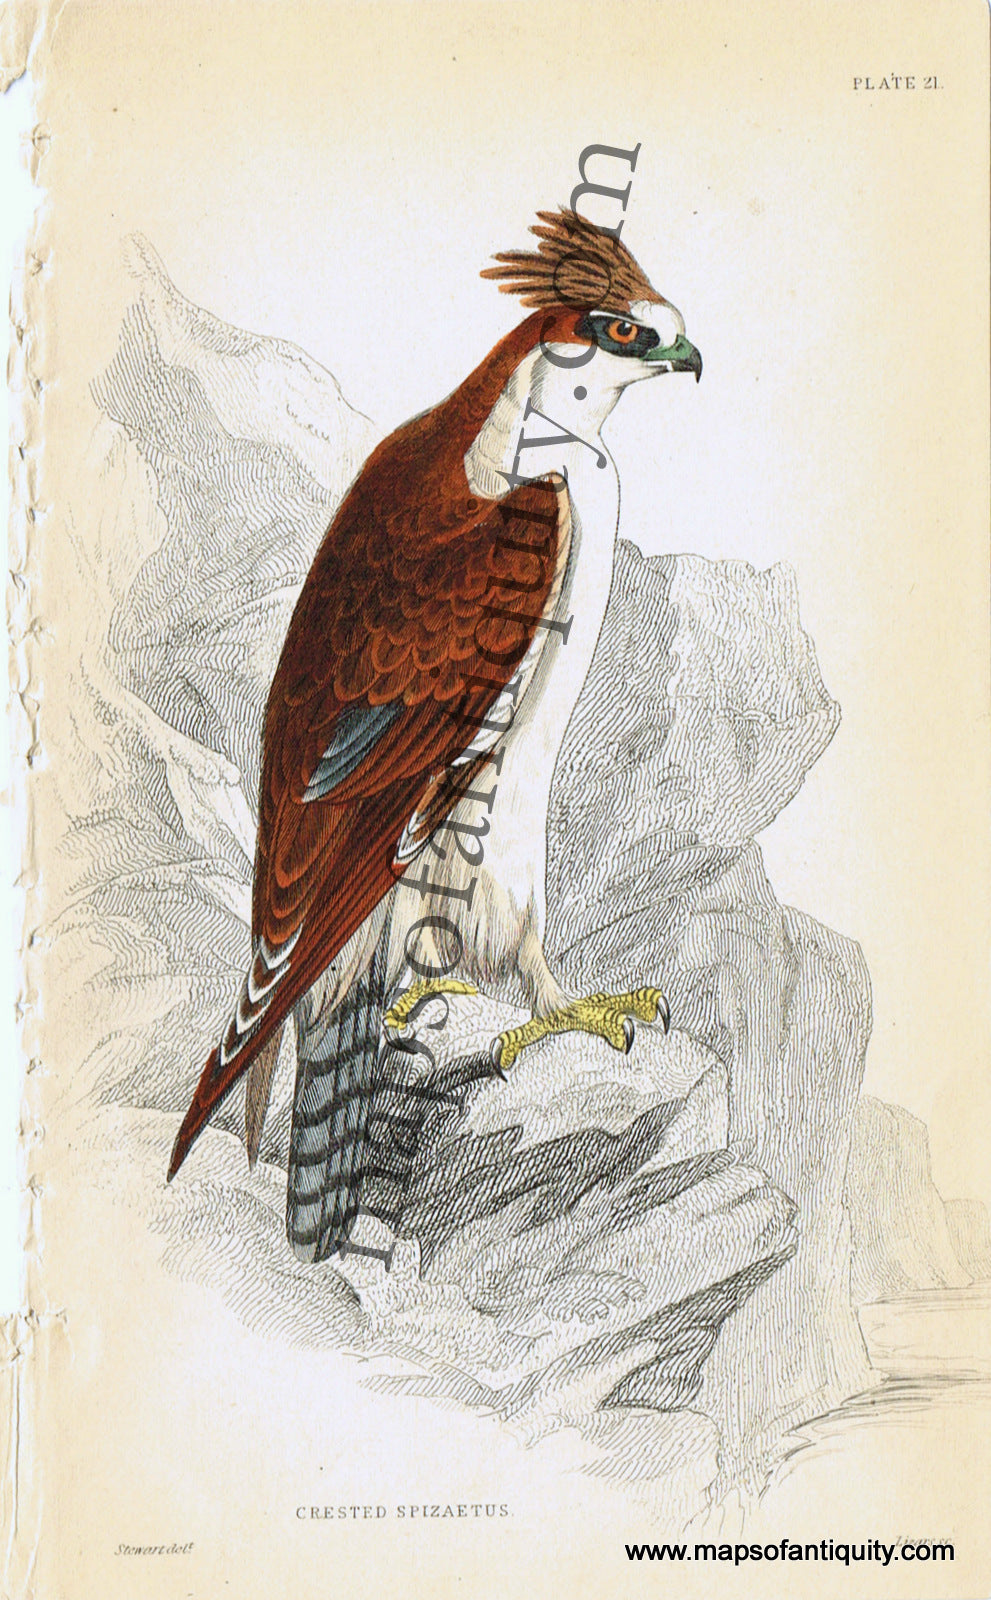 '-Crested-Spizaetus-Pl.-21-Natural-History-Birds-1834-Jardine-Maps-Of-Antiquity